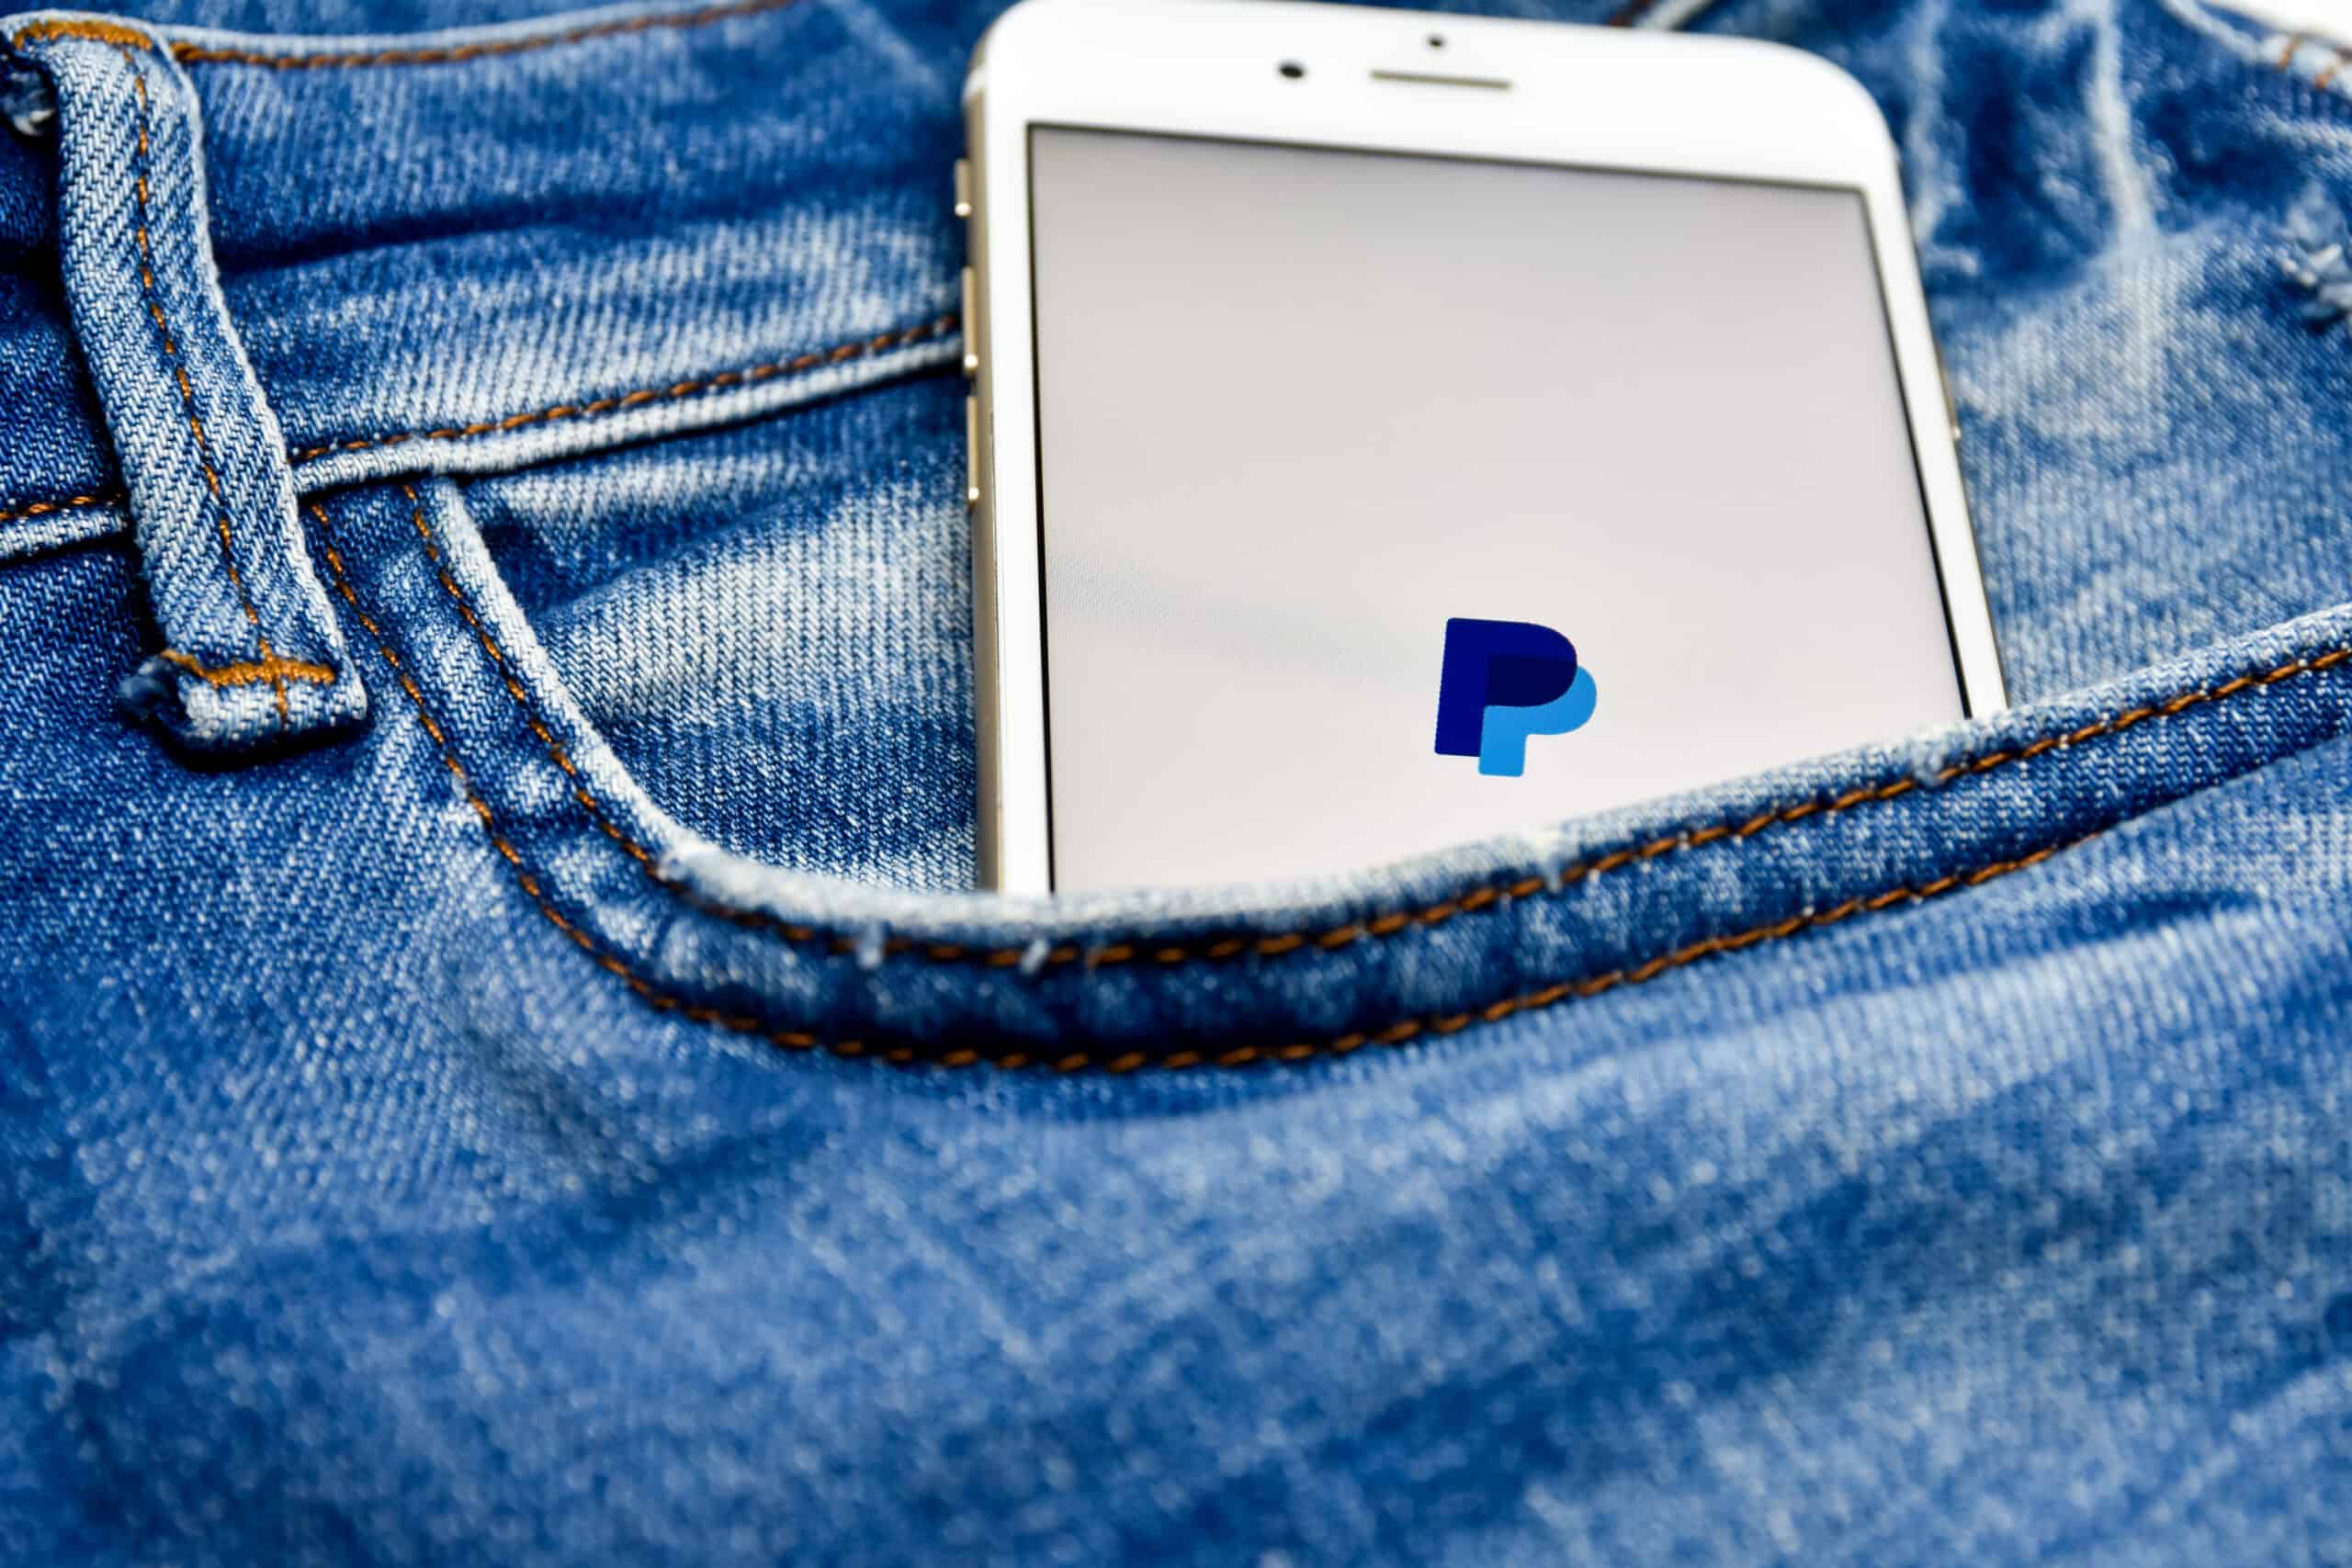 paypal app on mobile phone in jeans pocket